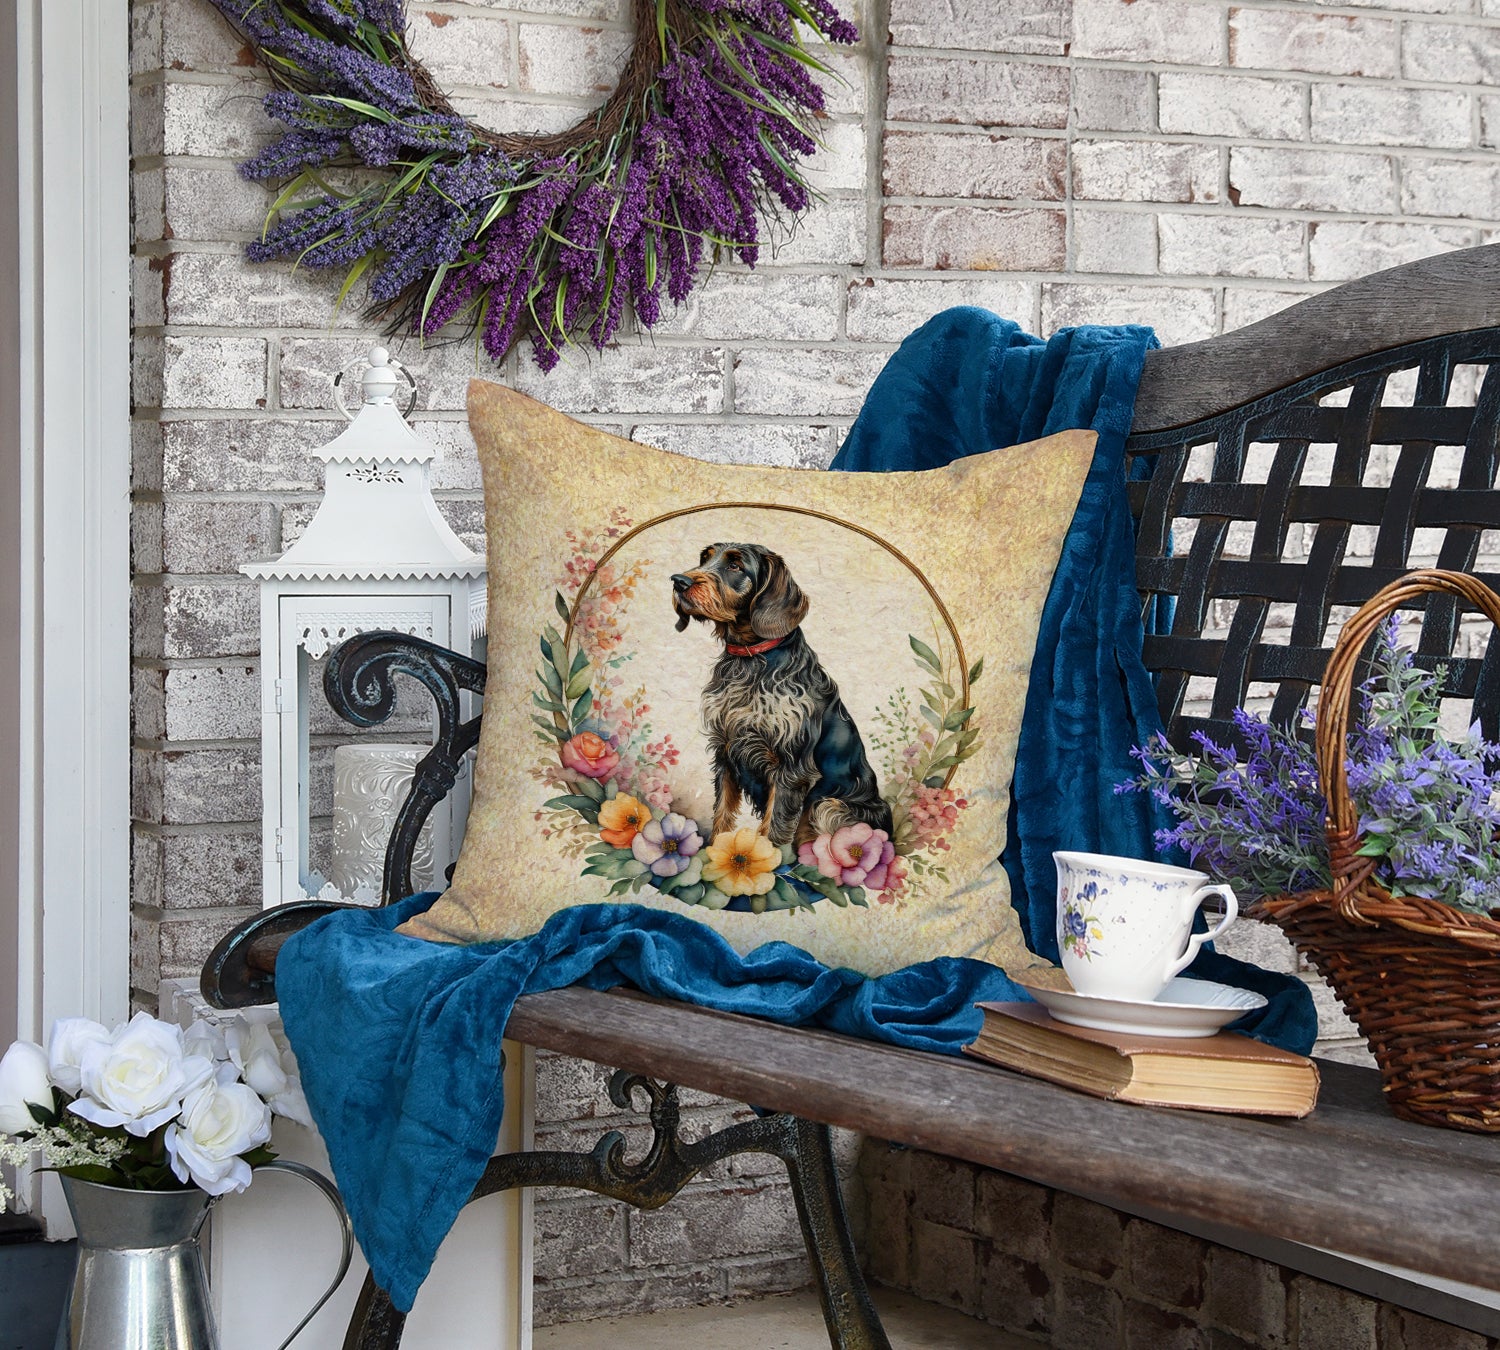 German Wirehaired Pointer and Flowers Fabric Decorative Pillow